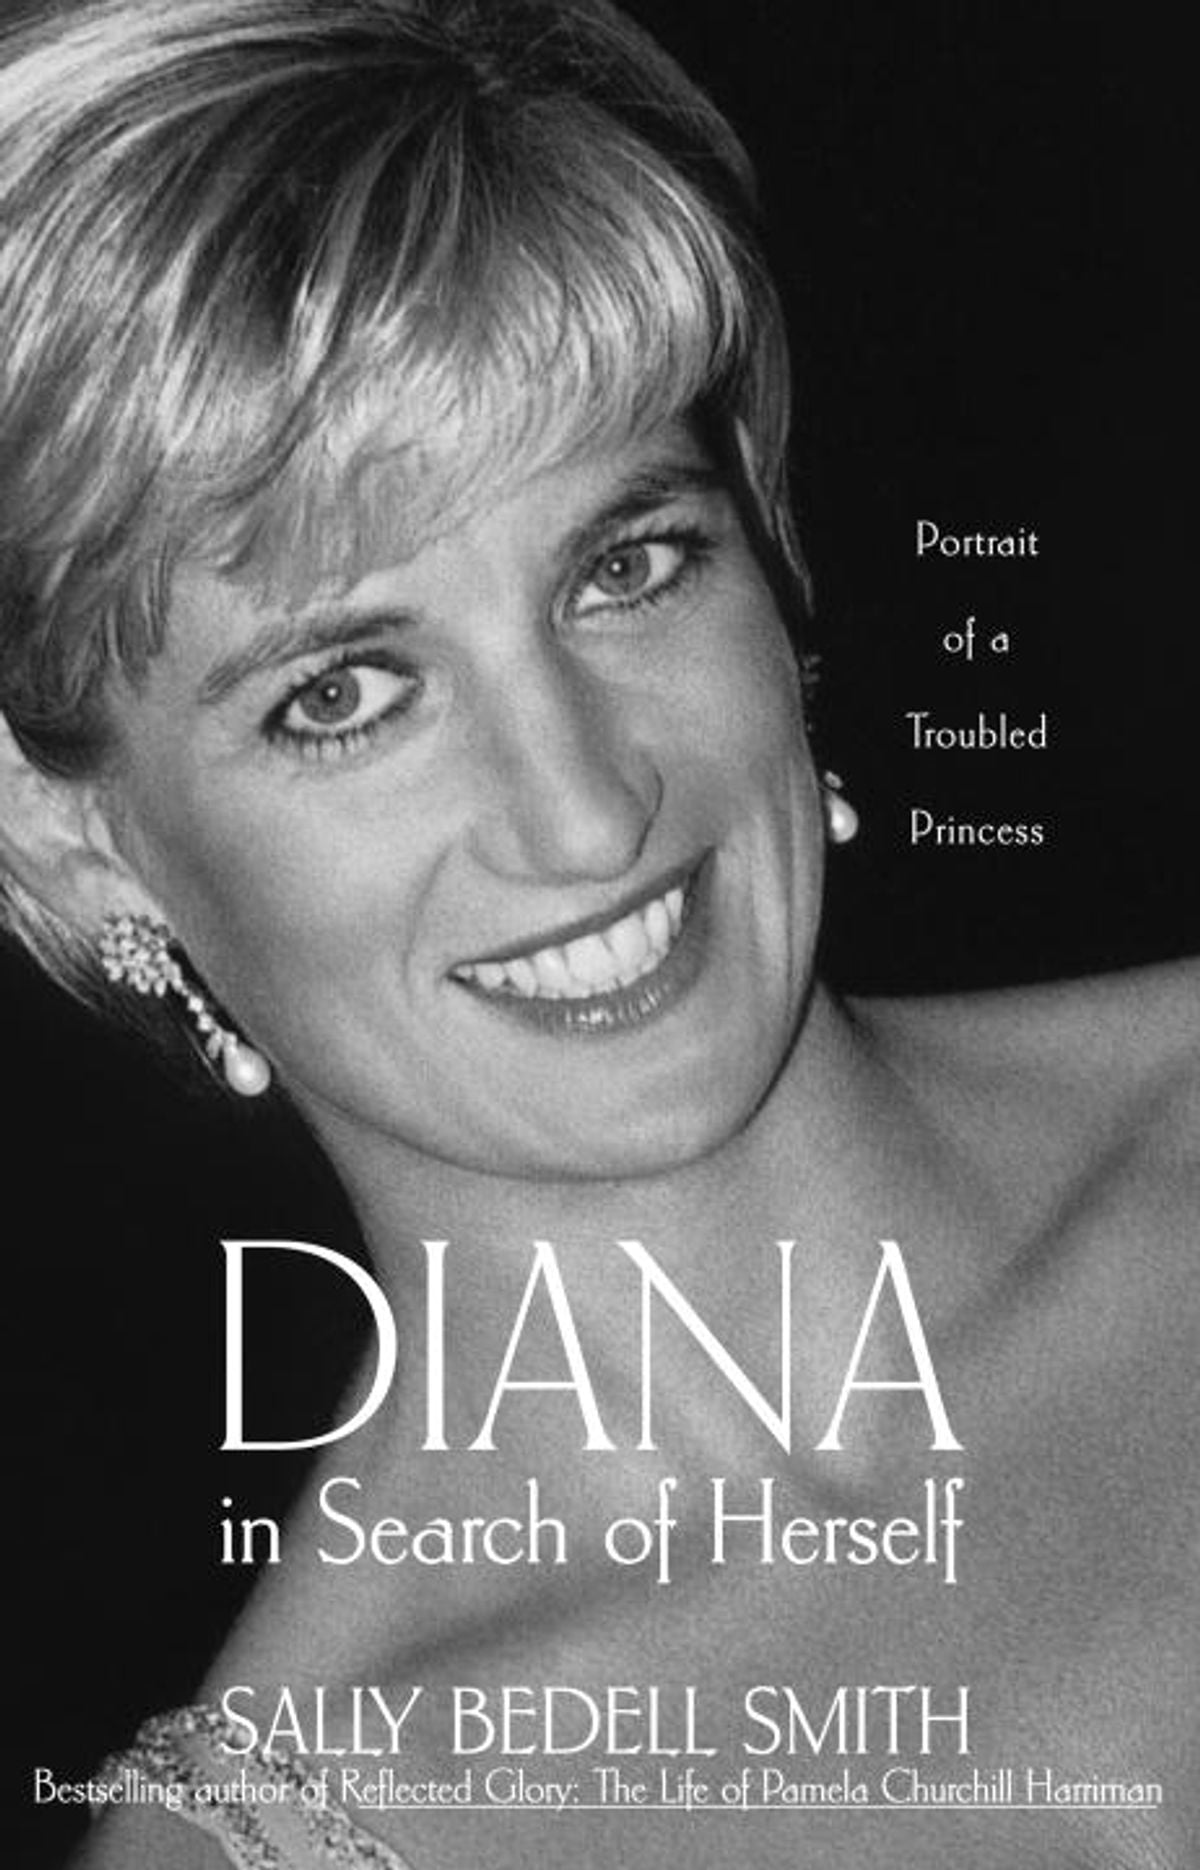 Diana in Search of Herself by Sally Bedell Smith